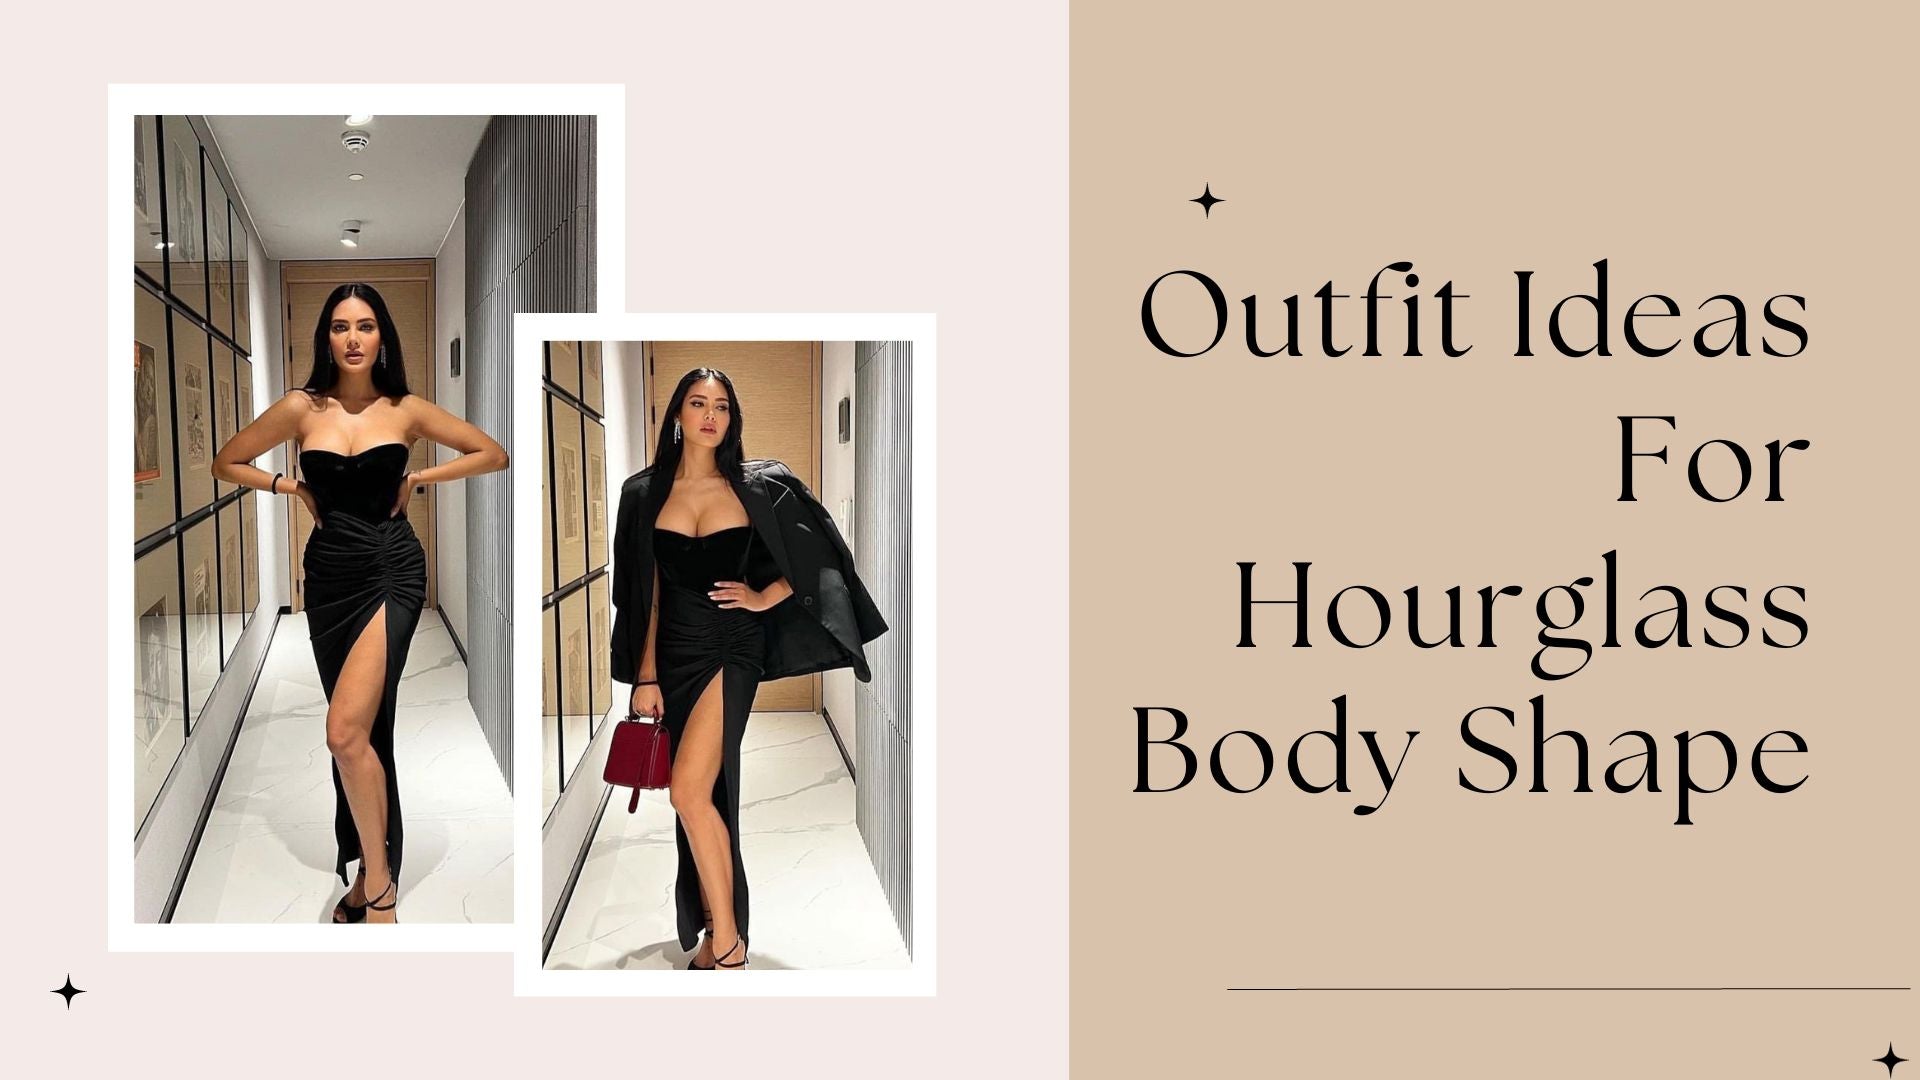 Flattering Fashion Tips for Embracing Your Beautiful Body